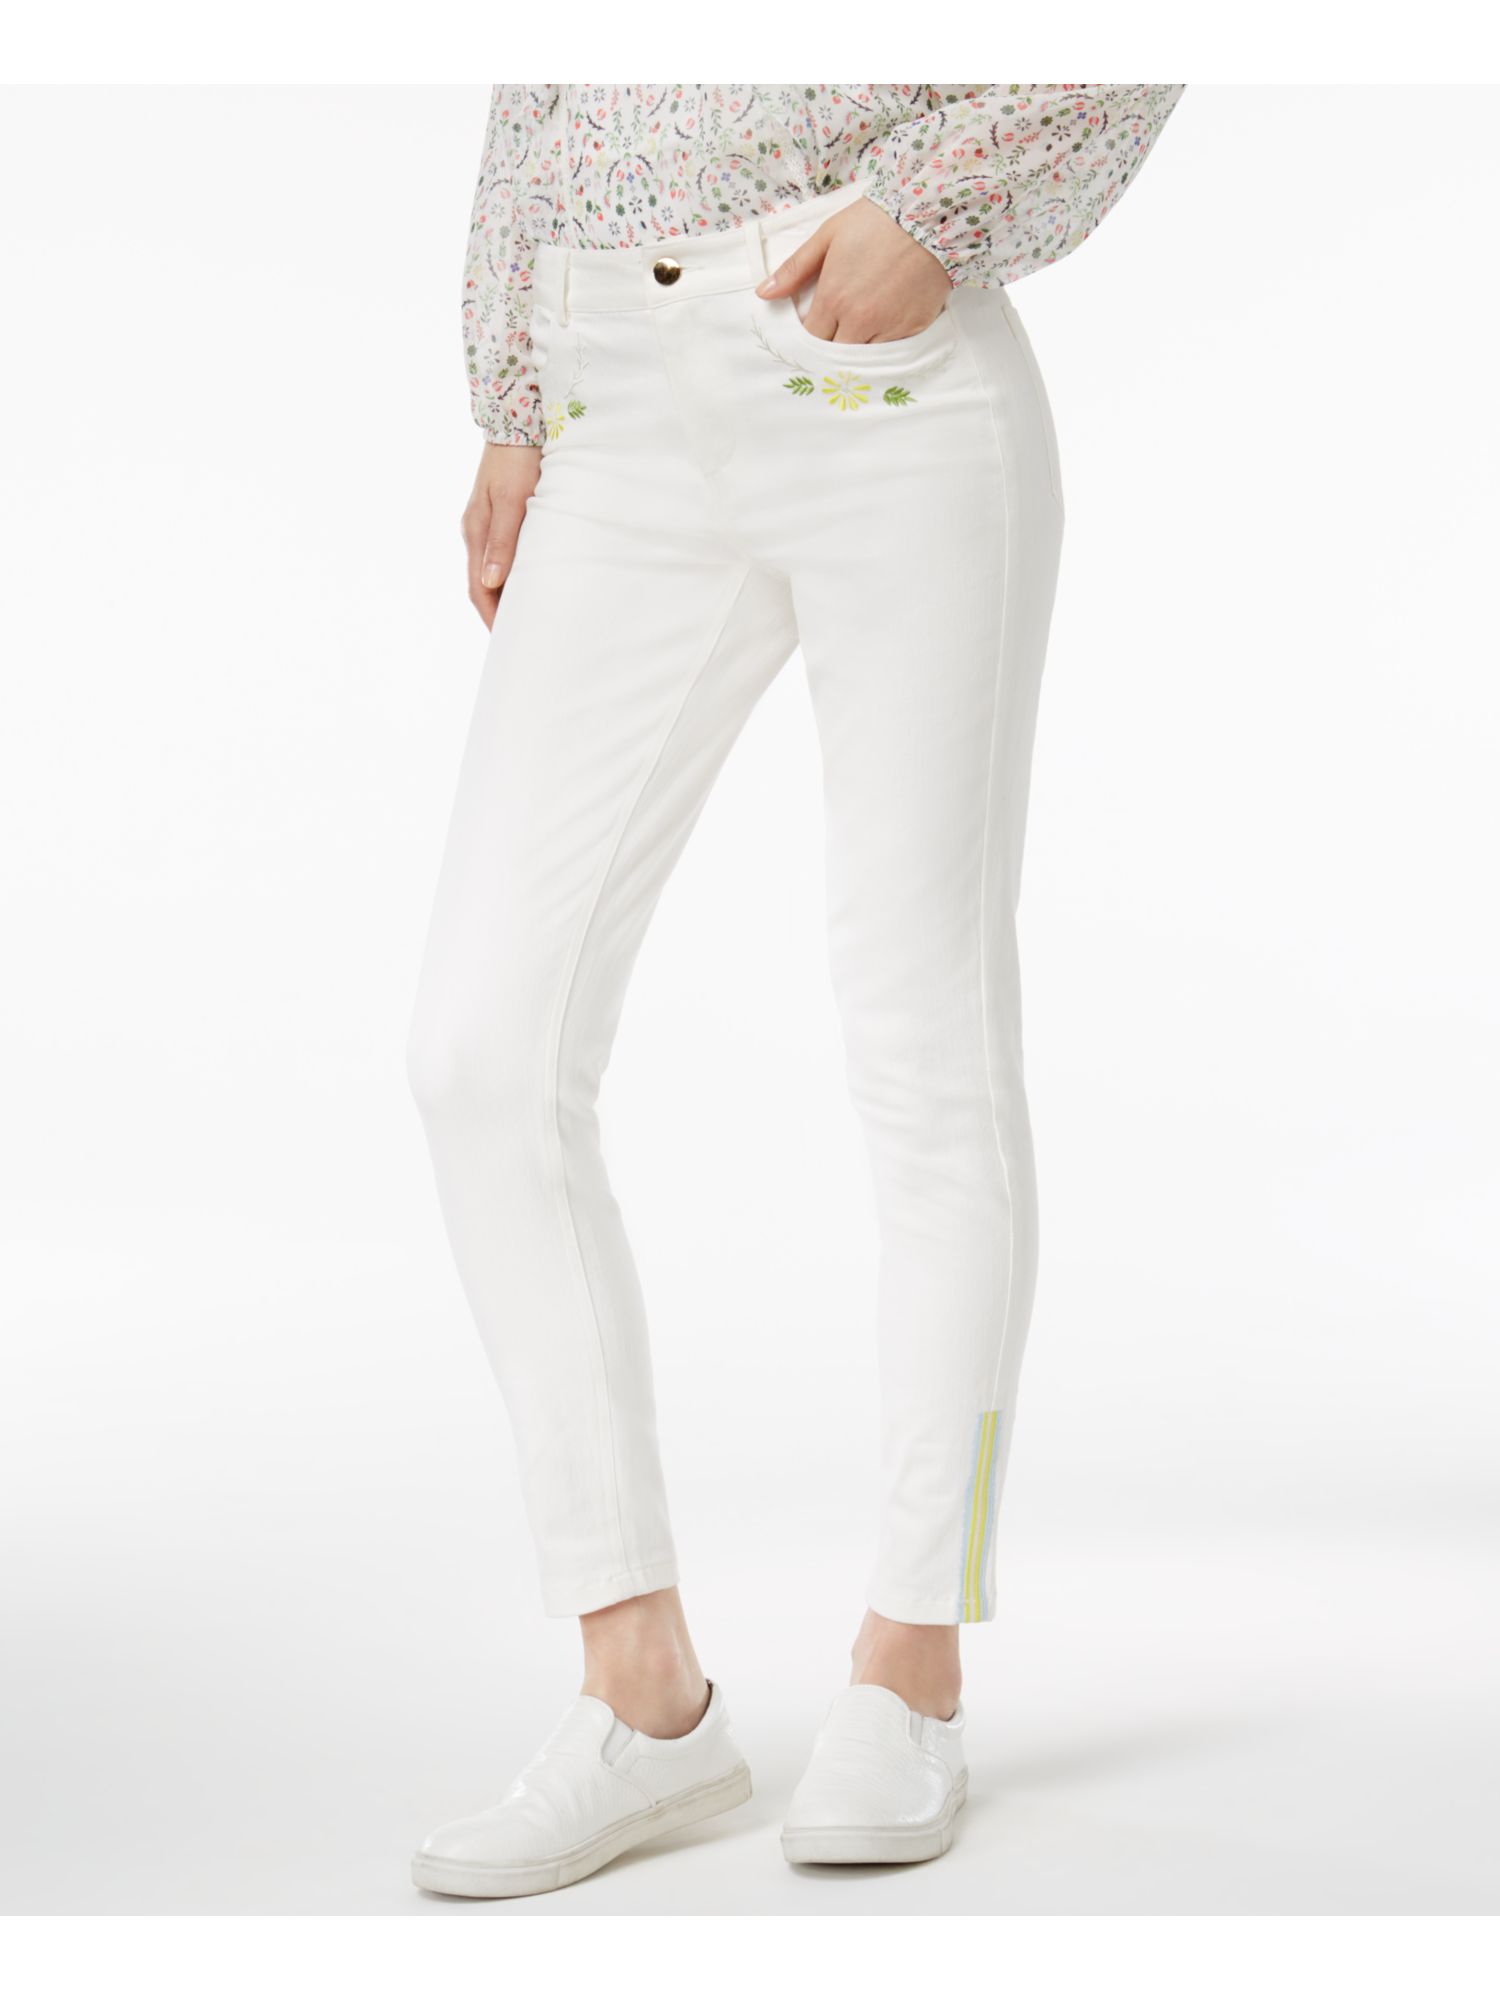 CYNTHIA ROWLEY Womens White Embroidered Pants 10 - image 1 of 4